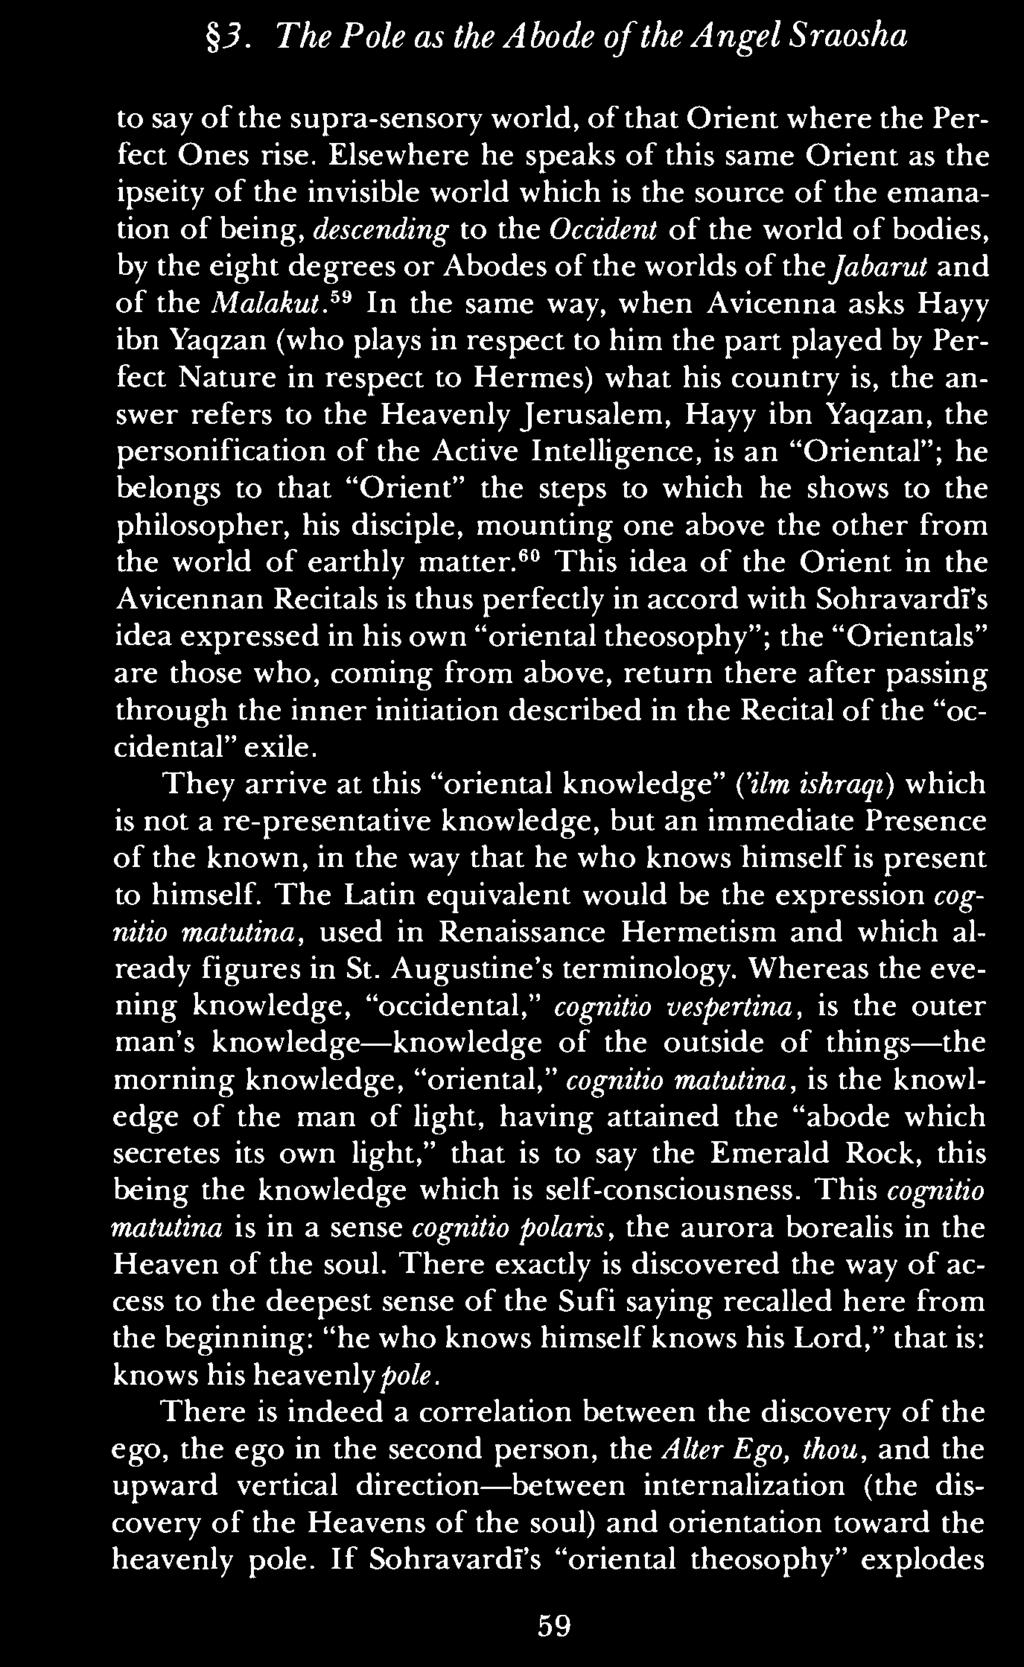 Abodes of the worlds of the Jabarut and of the Malakut, 59 In the same way, when Avicenna asks Hayy ibn Yaqzan (who plays in respect to him the part played by Perfect Nature in respect to Hermes)